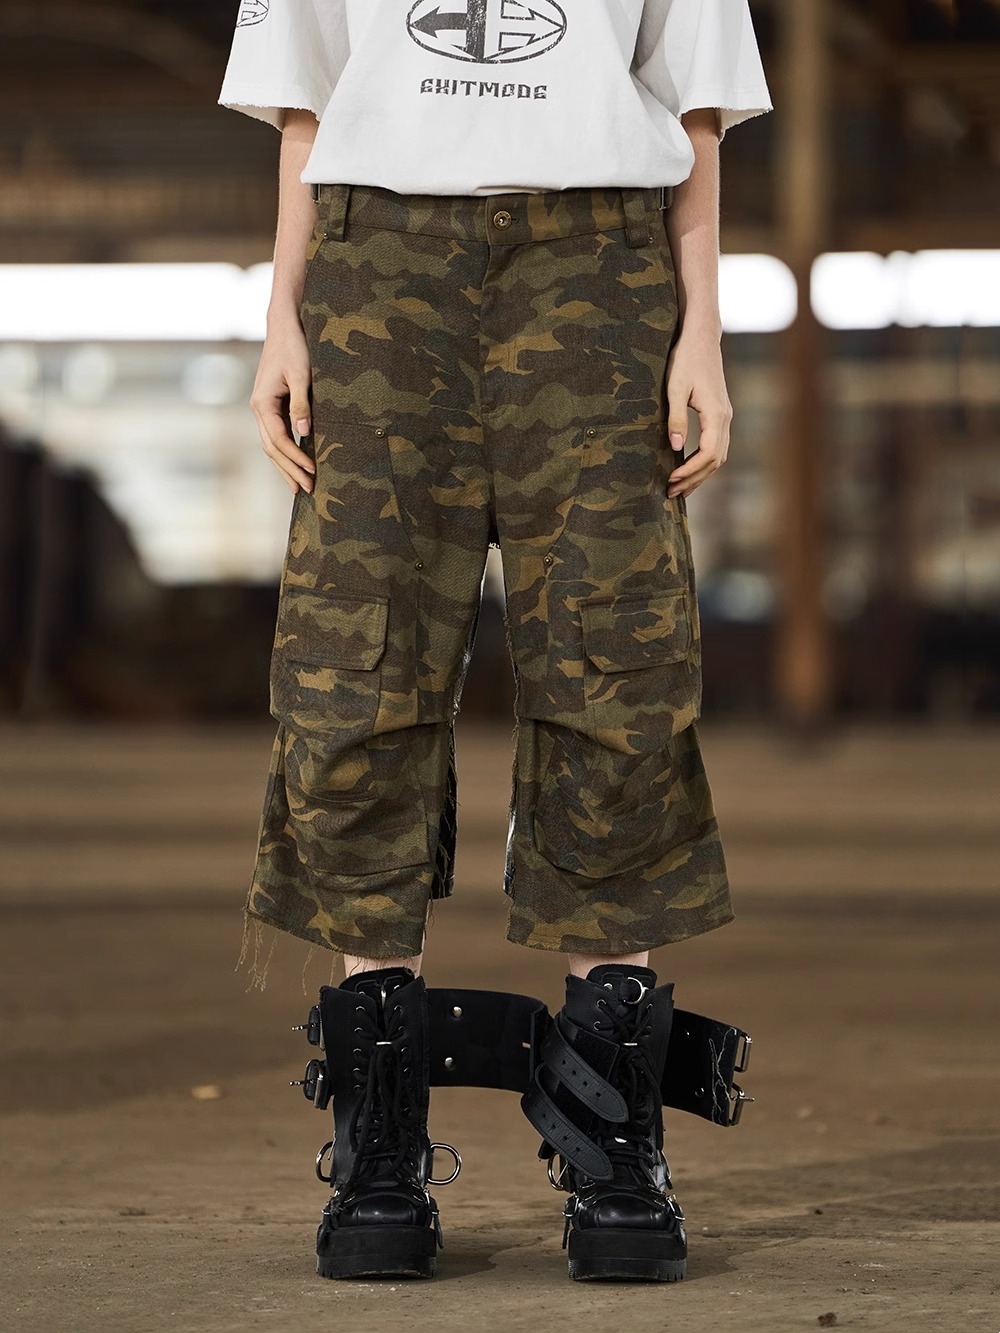 BLINDNOPLAN 24SS 3D Pleated Utility Camo Patchwork Shorts